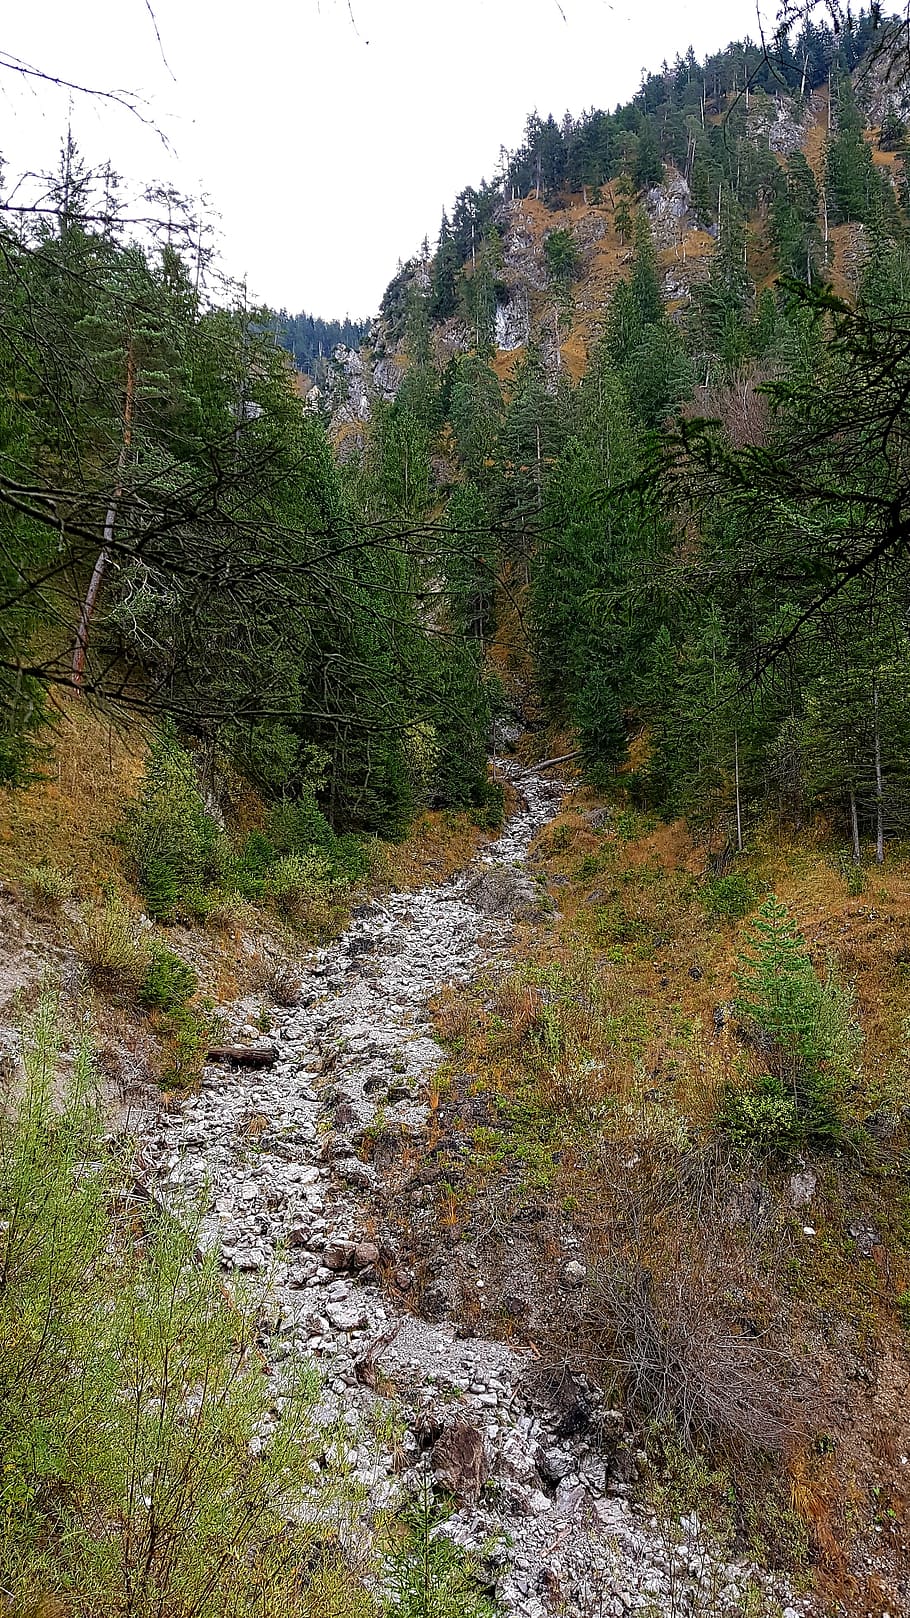 stream bed, dry, steep slope, forest, mountains, nature, green, mountainside, erosion, landscape